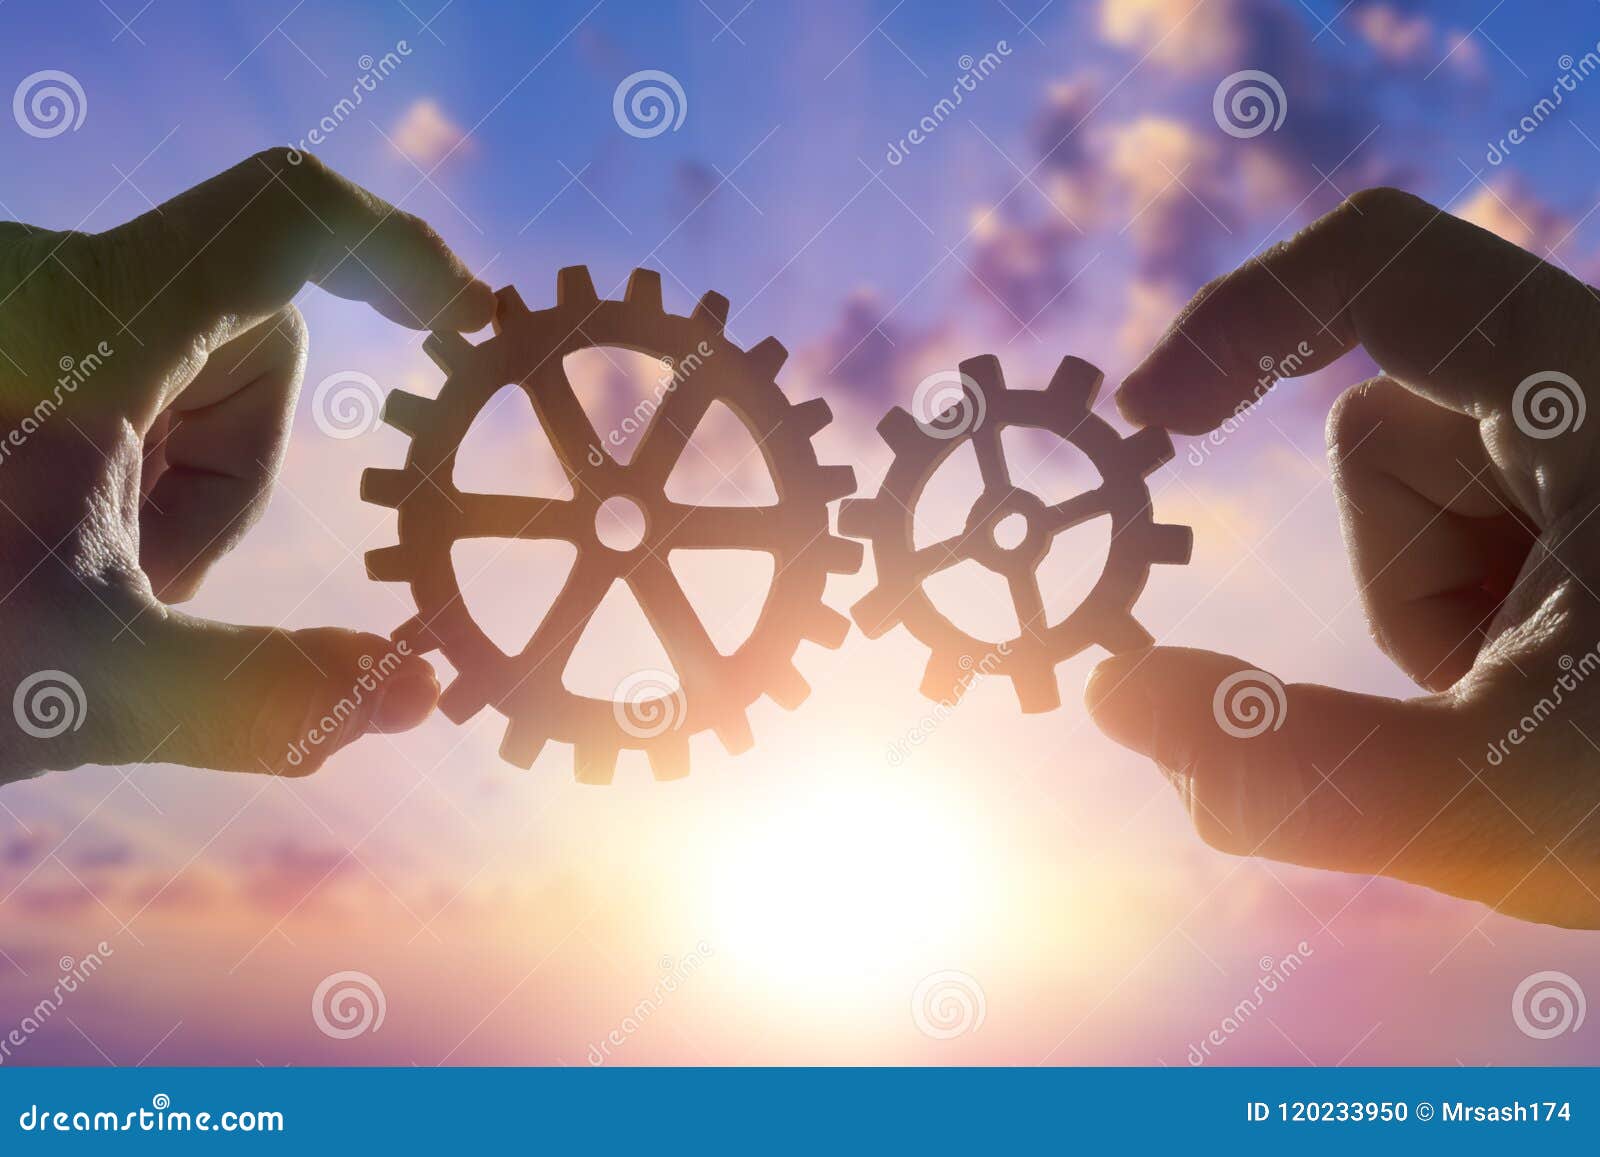 two hands connect the gears, the details of the puzzle. against the sky with sunset.